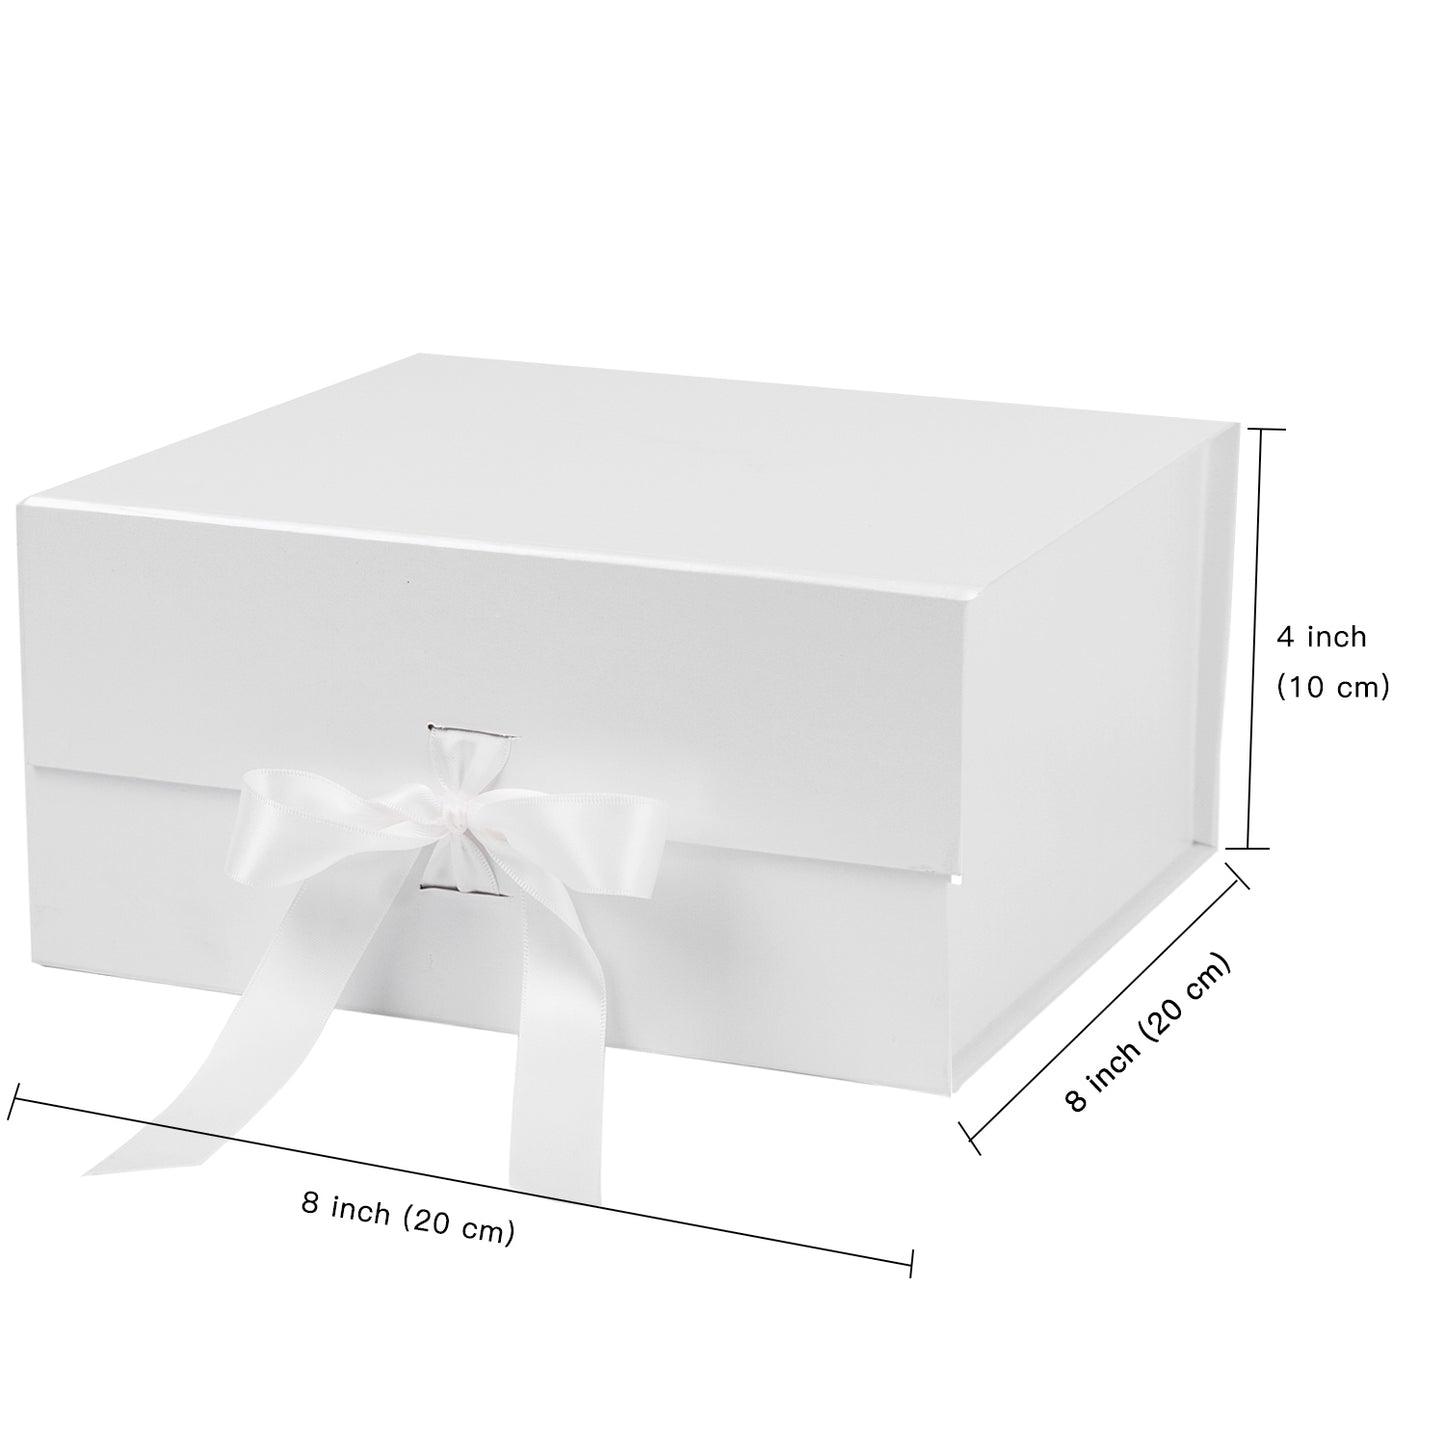 WRAPLA White Gift Box with Satin Ribbon, 20X20X10CM Collapsible Gift Box with Magnetic Closure for Party, Wedding, Gift Wrap, Bridesmaid Proposal, Storage